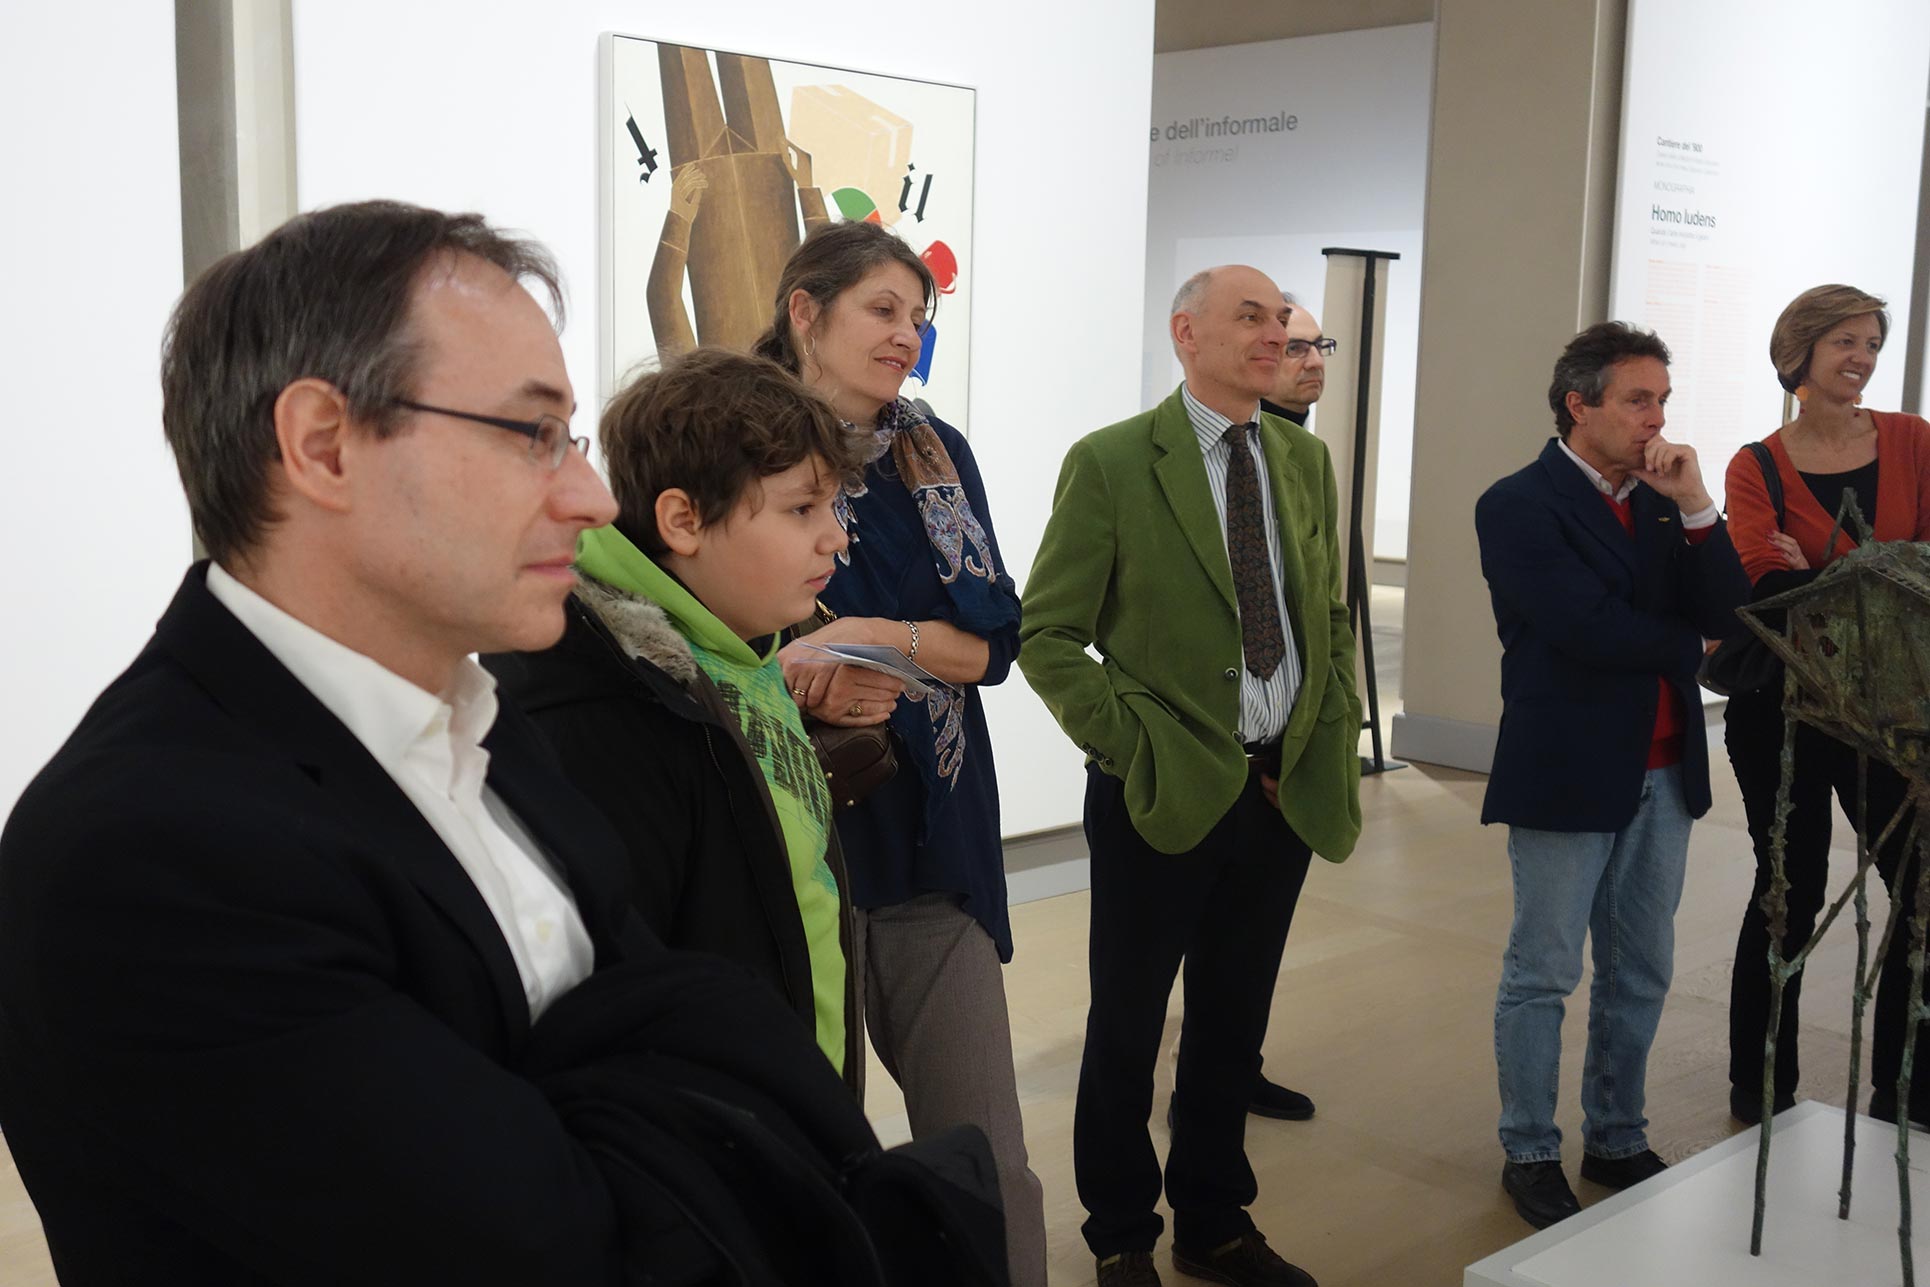 Guided tour with Francesco Tedeschi curator at 